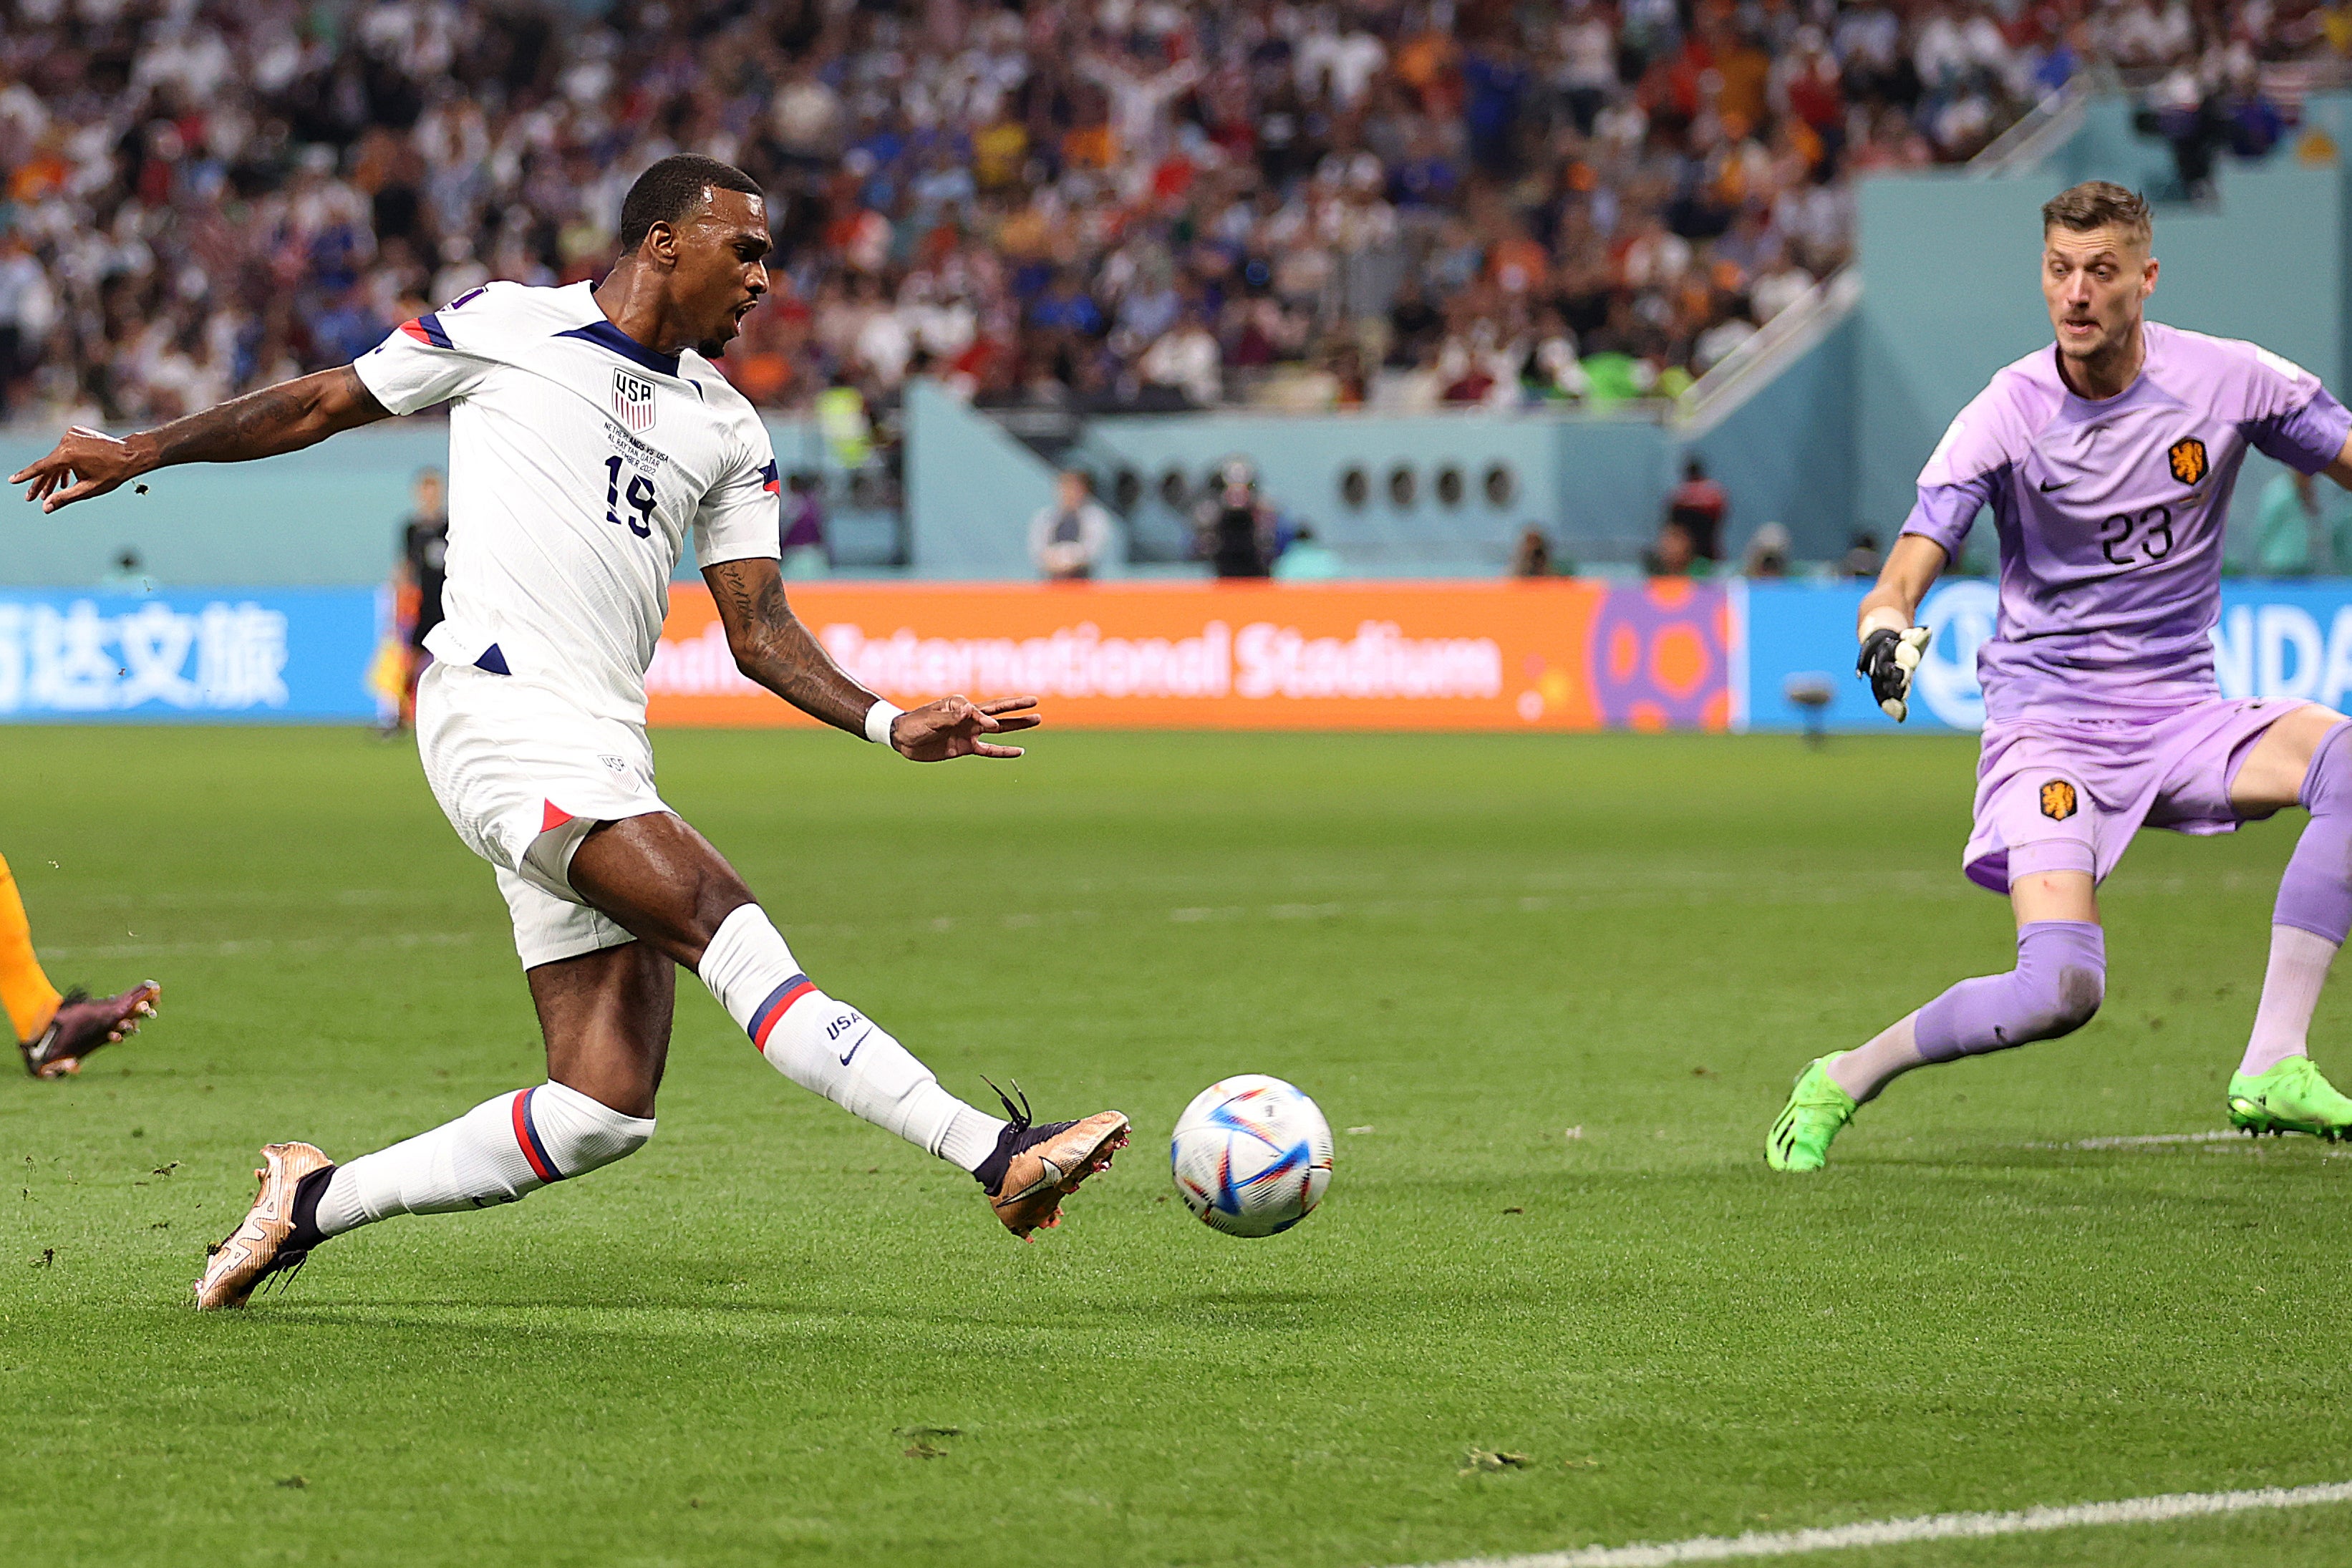 Wright scored during the USA’s World Cup defeat to the Netherlands